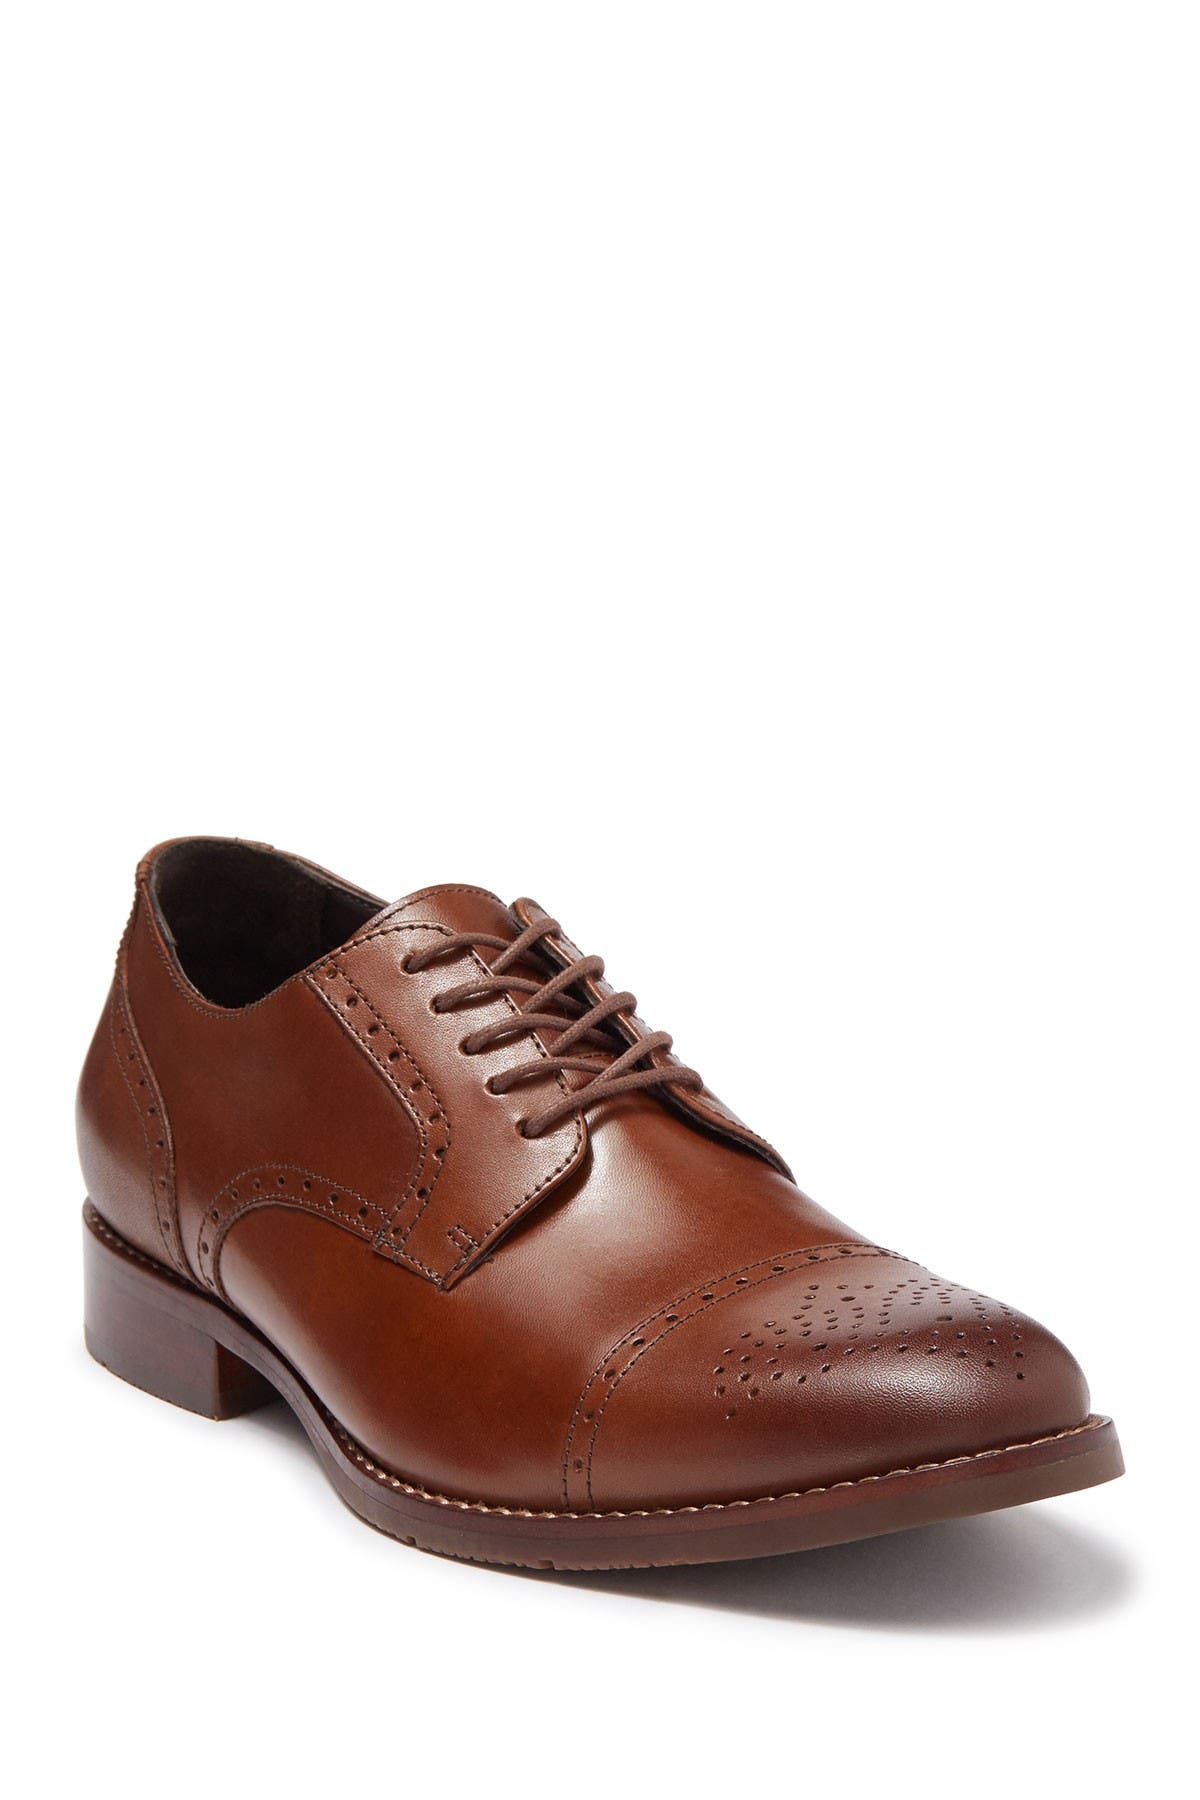 mens dress shoes on clearance